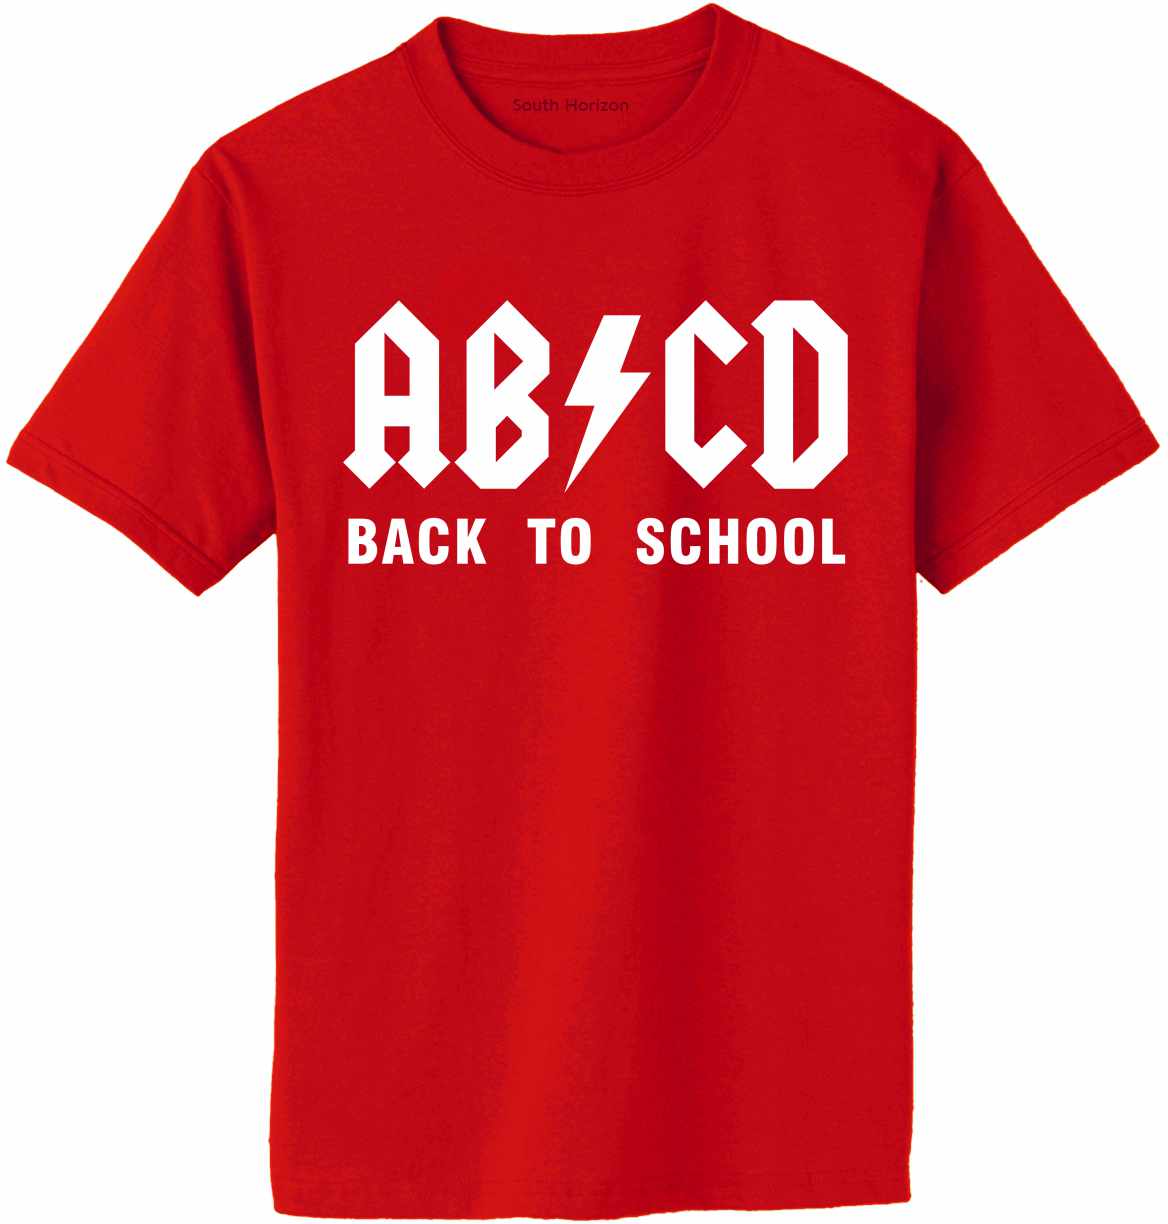 ABCD Back To School on Adult T-Shirt